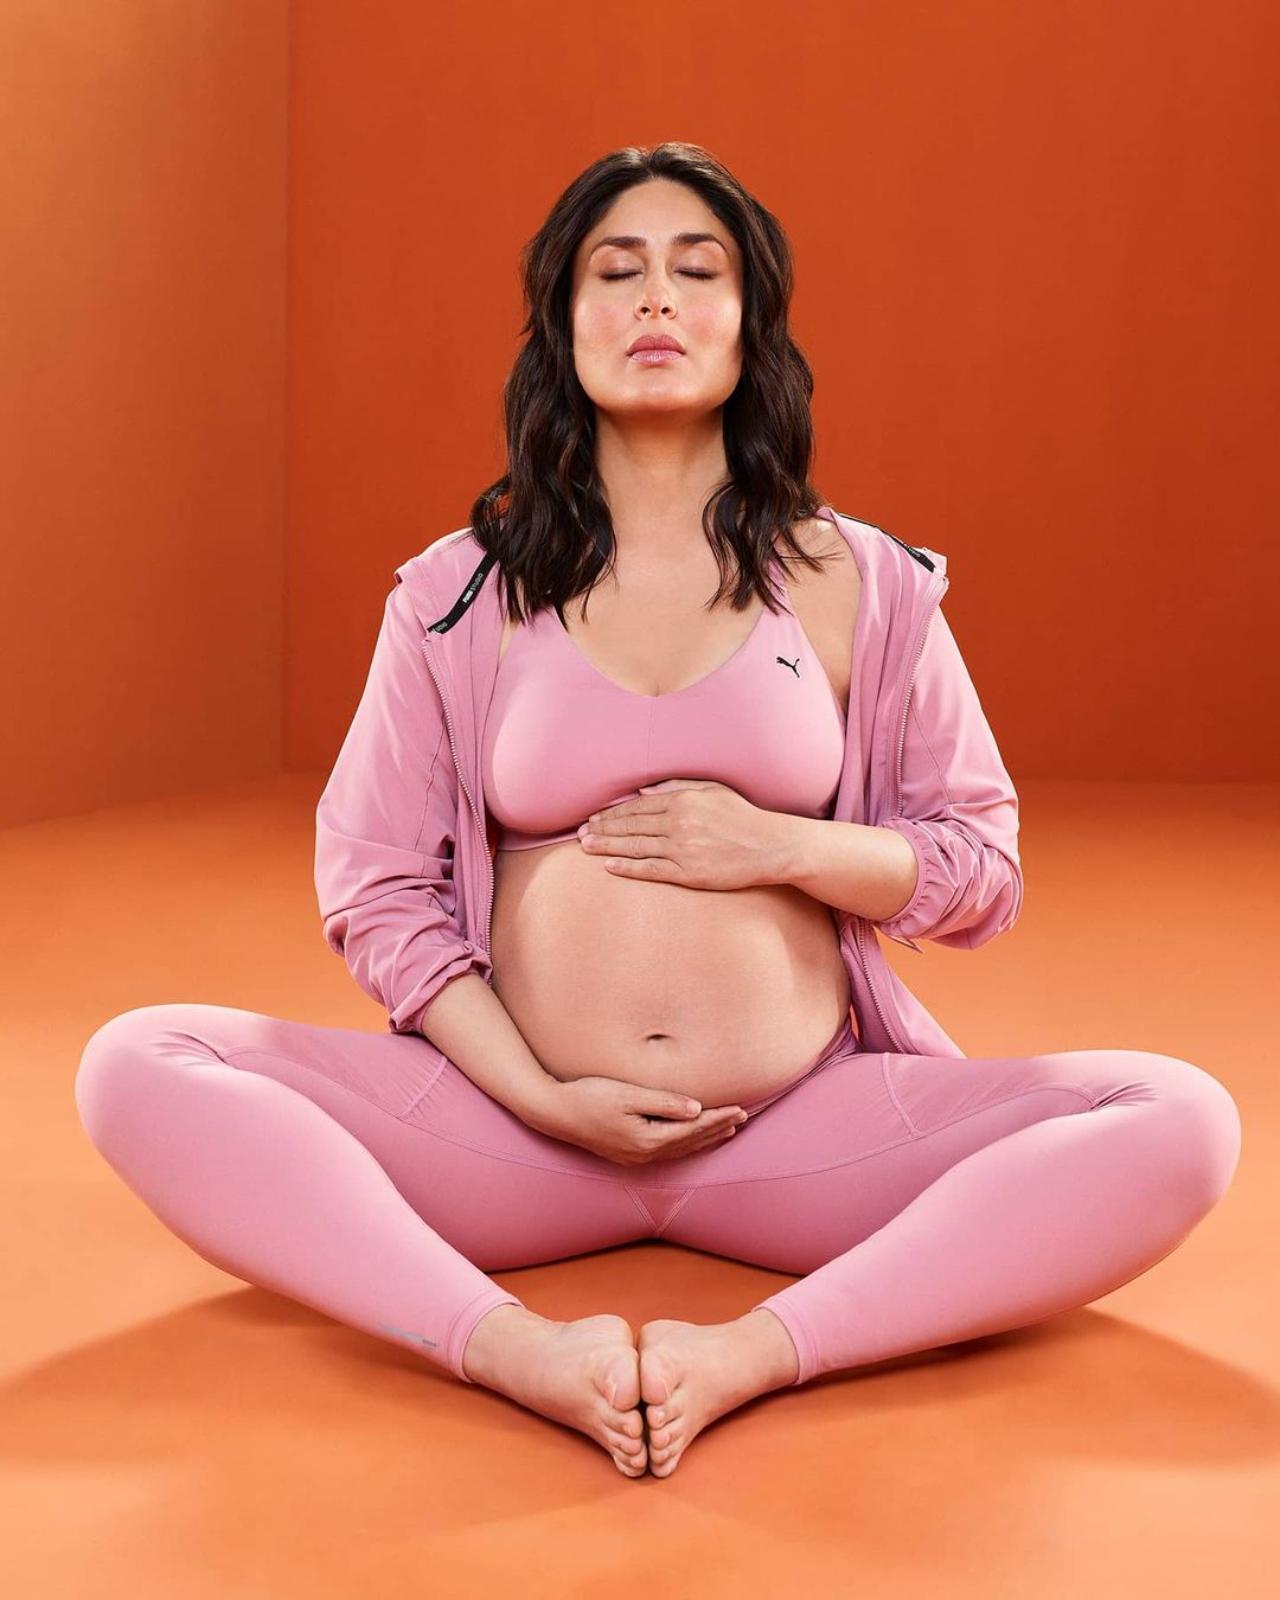 Kareena Kapoor Khan
The 'Veere Di Wedding' star has been an advocate of Yoga for a long time. Even during her pregnancy, she kept on practicing yoga. Back in the day, when she was pregnant with her second child, she shared pictures of her doing Yoga while flaunting her baby bump